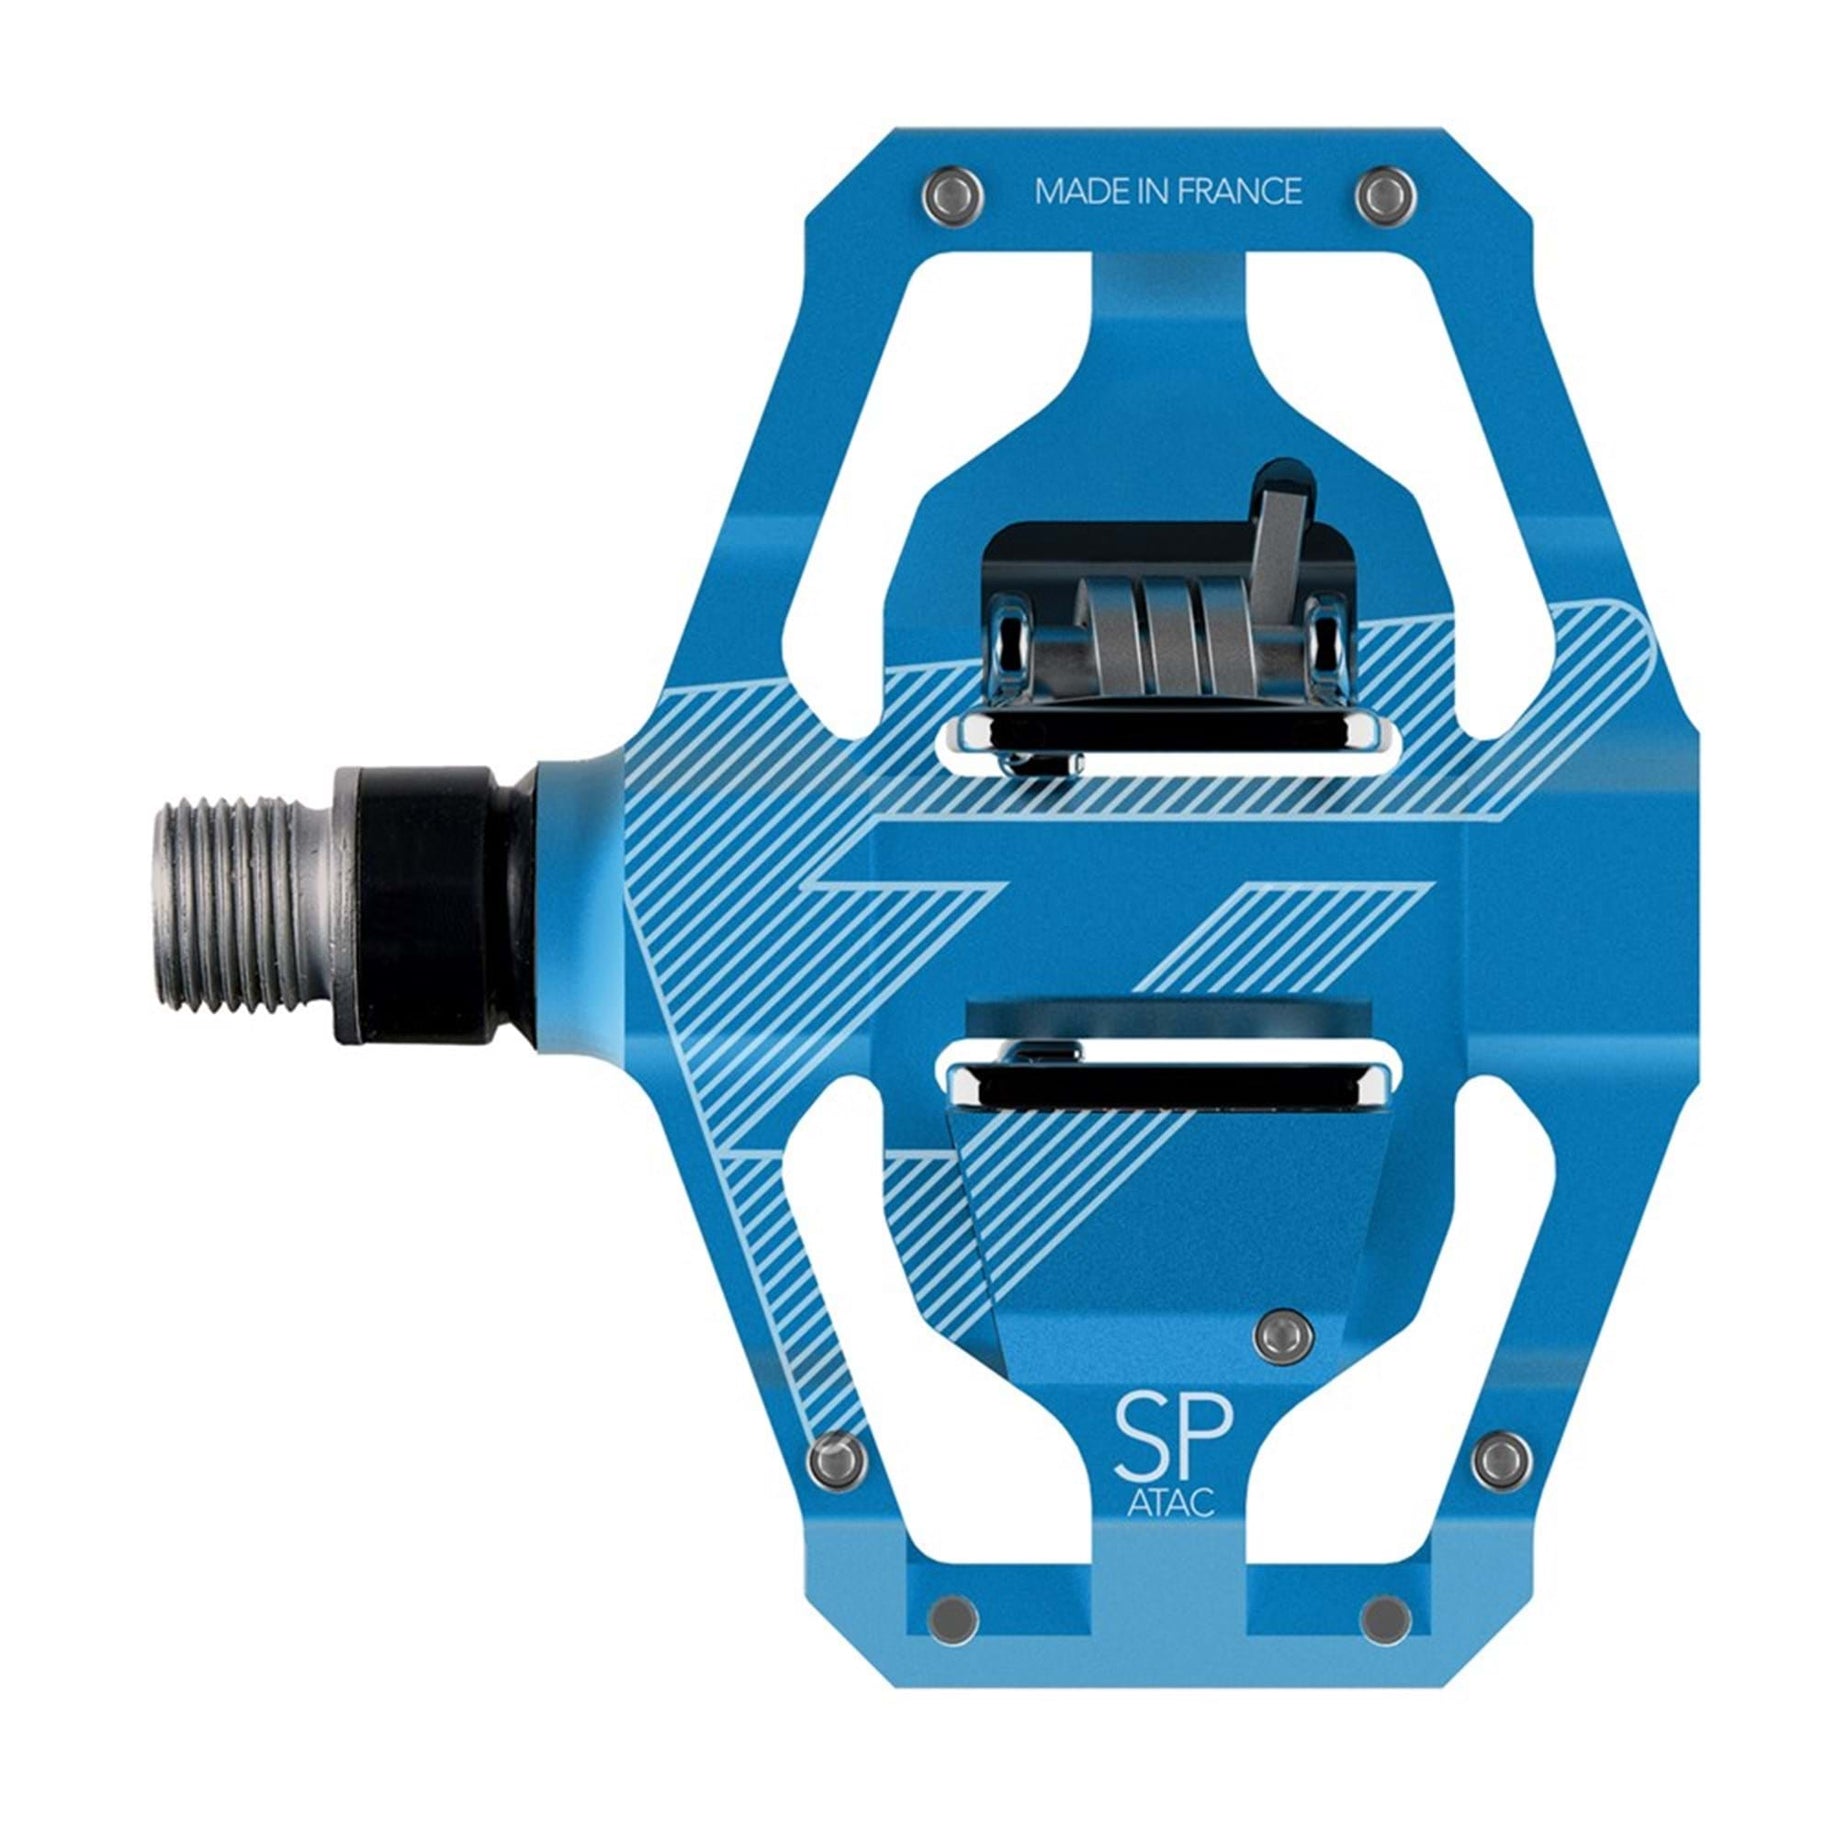 Time Speciale 12 Enduro Pedals Including Atac Cleats - Blue